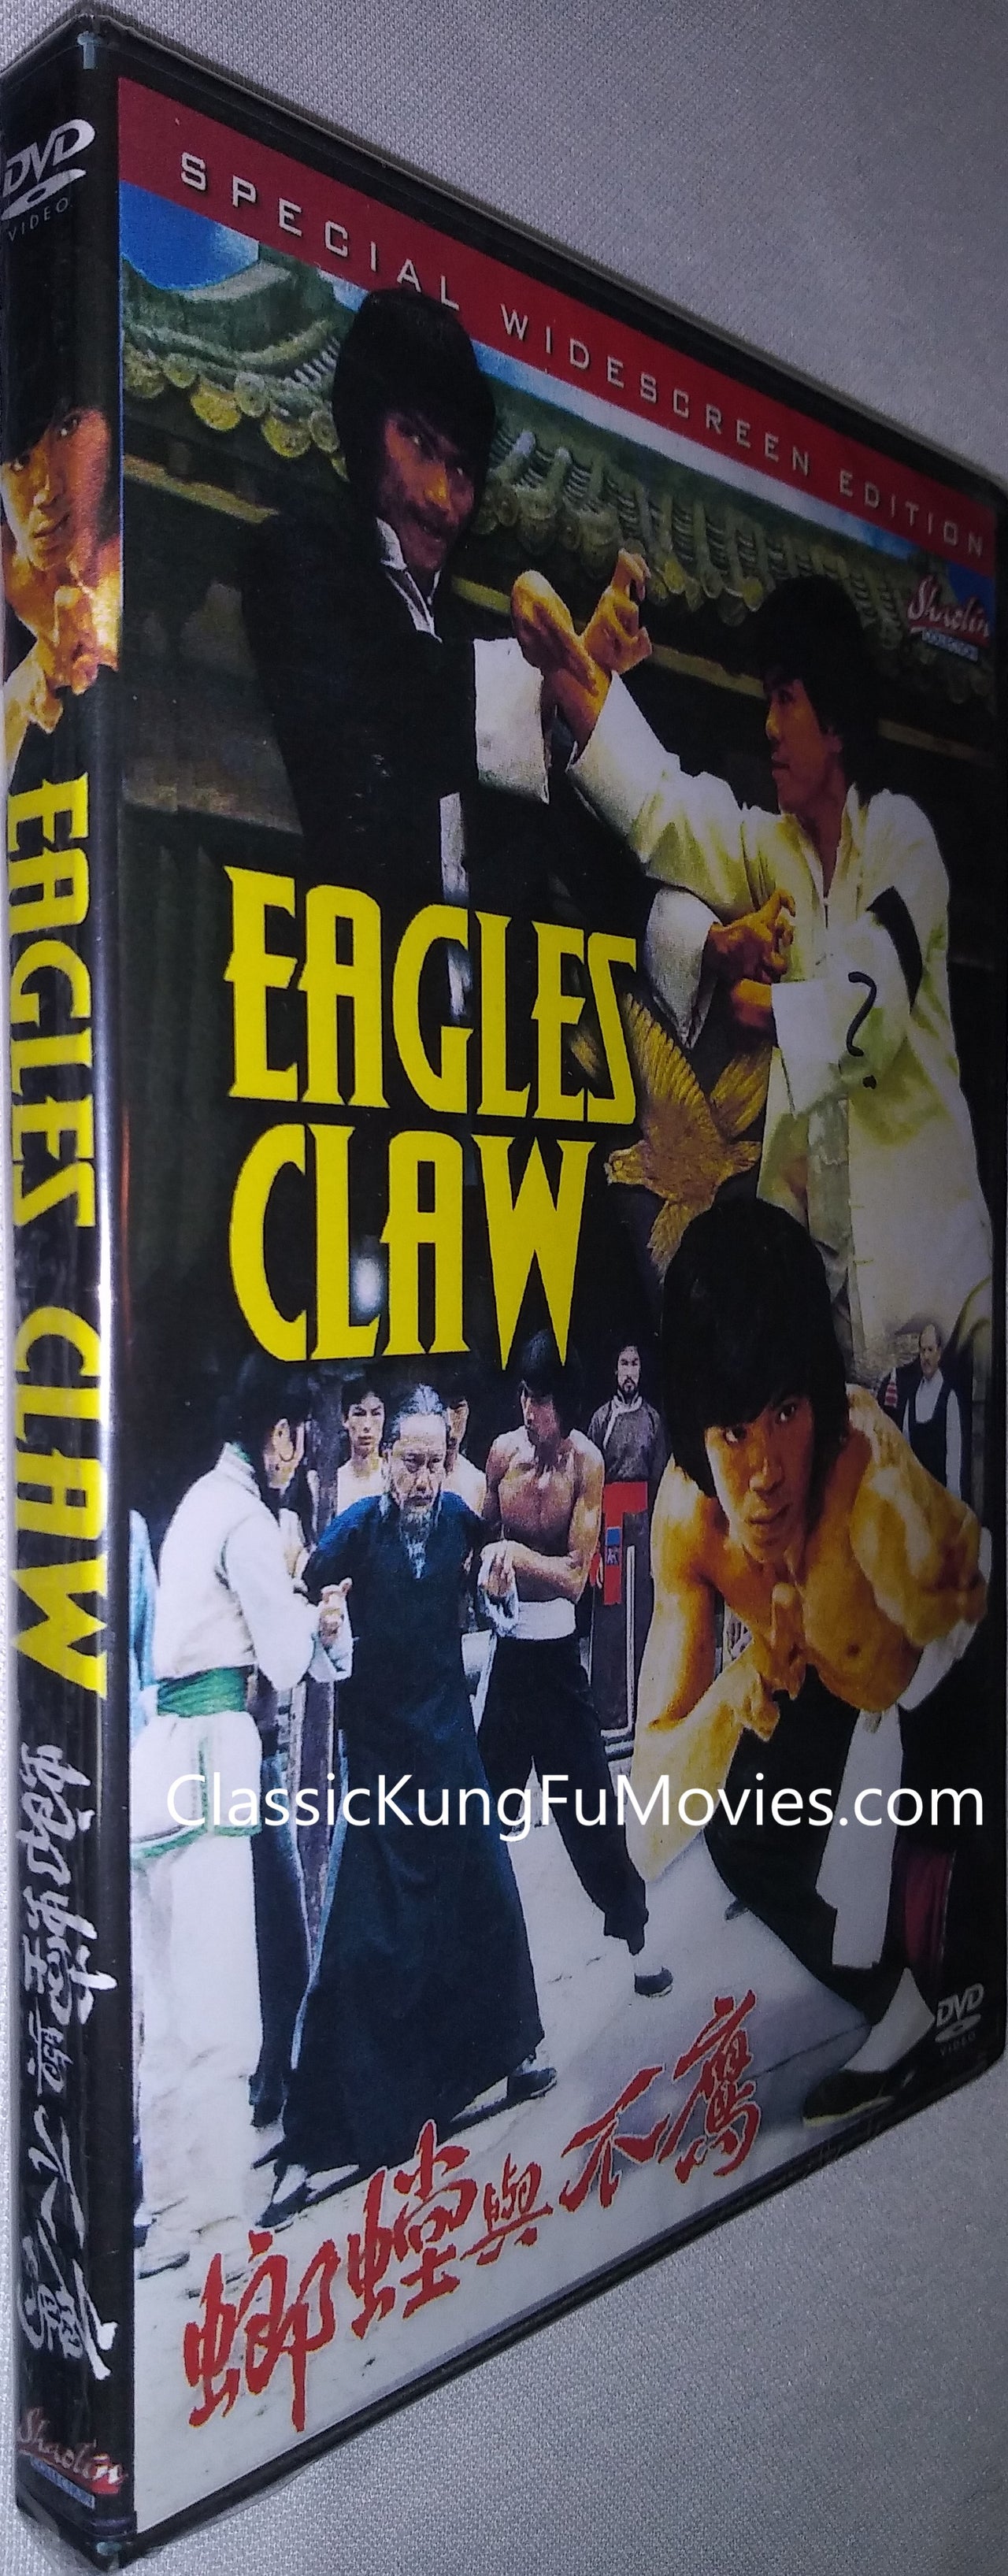 "Eagle's Claw" a.k.a. Ying Zhao Tang Lang (1978)